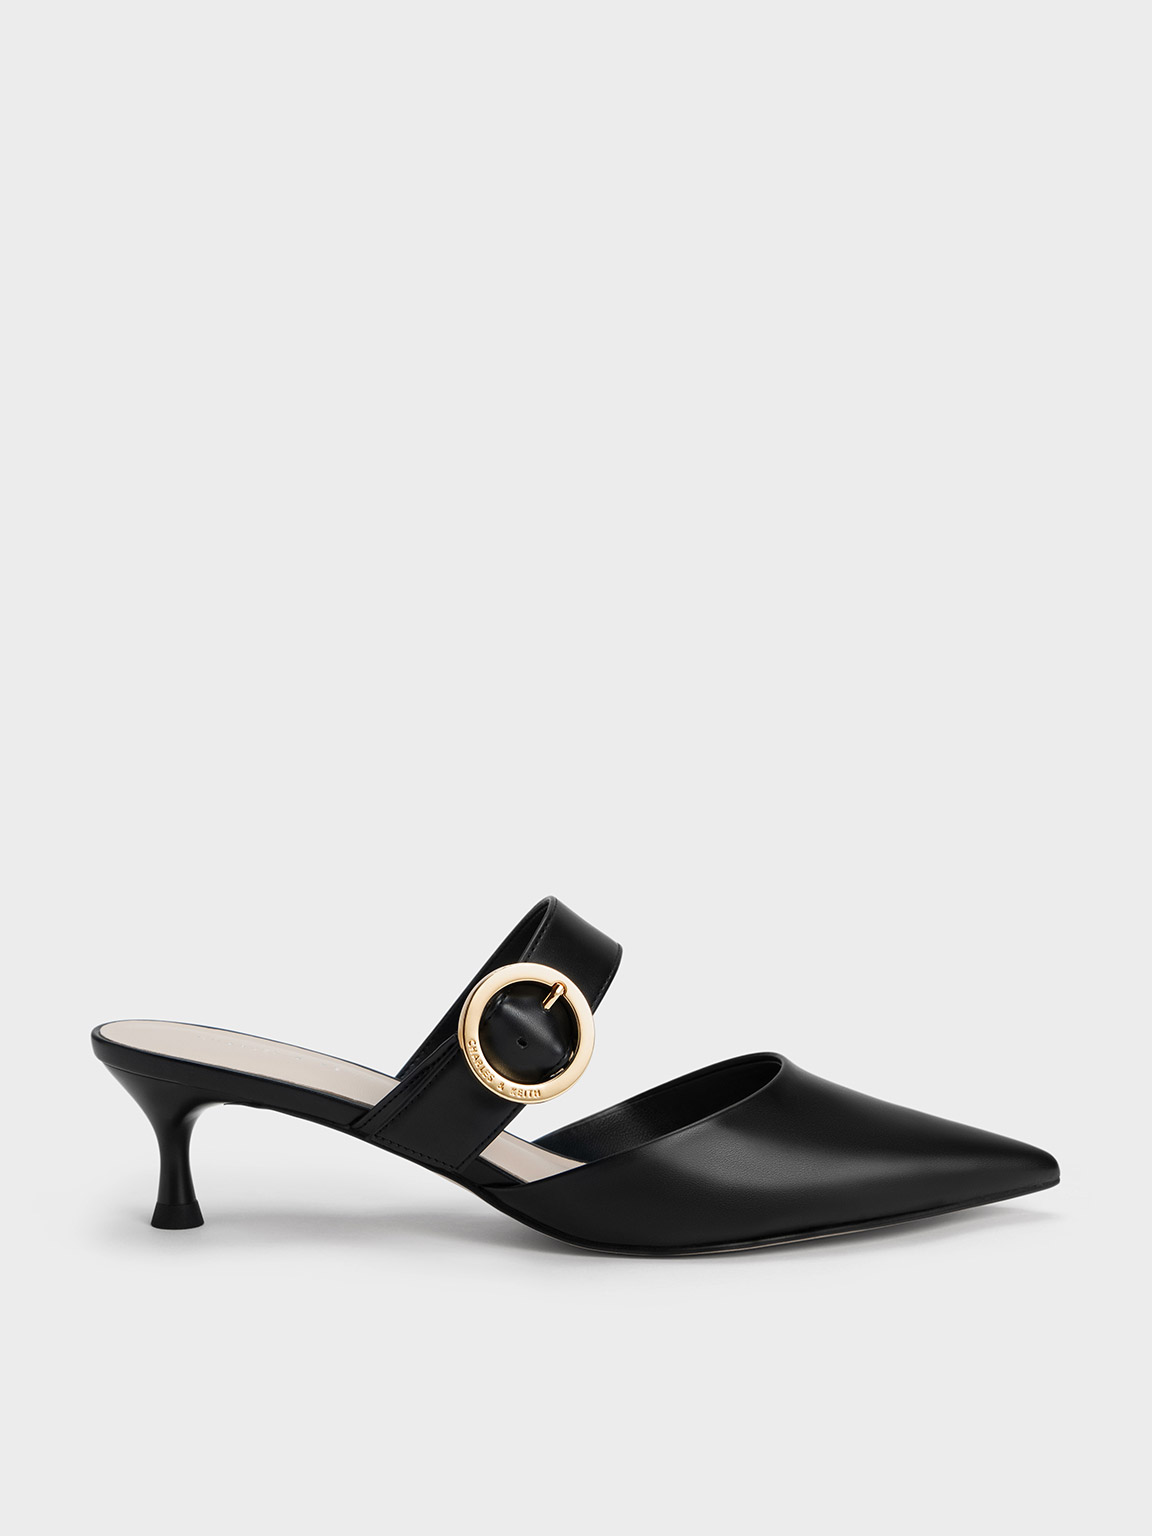 CHARLES & KEITH Spool Heel Court Shoes, Black at John Lewis & Partners